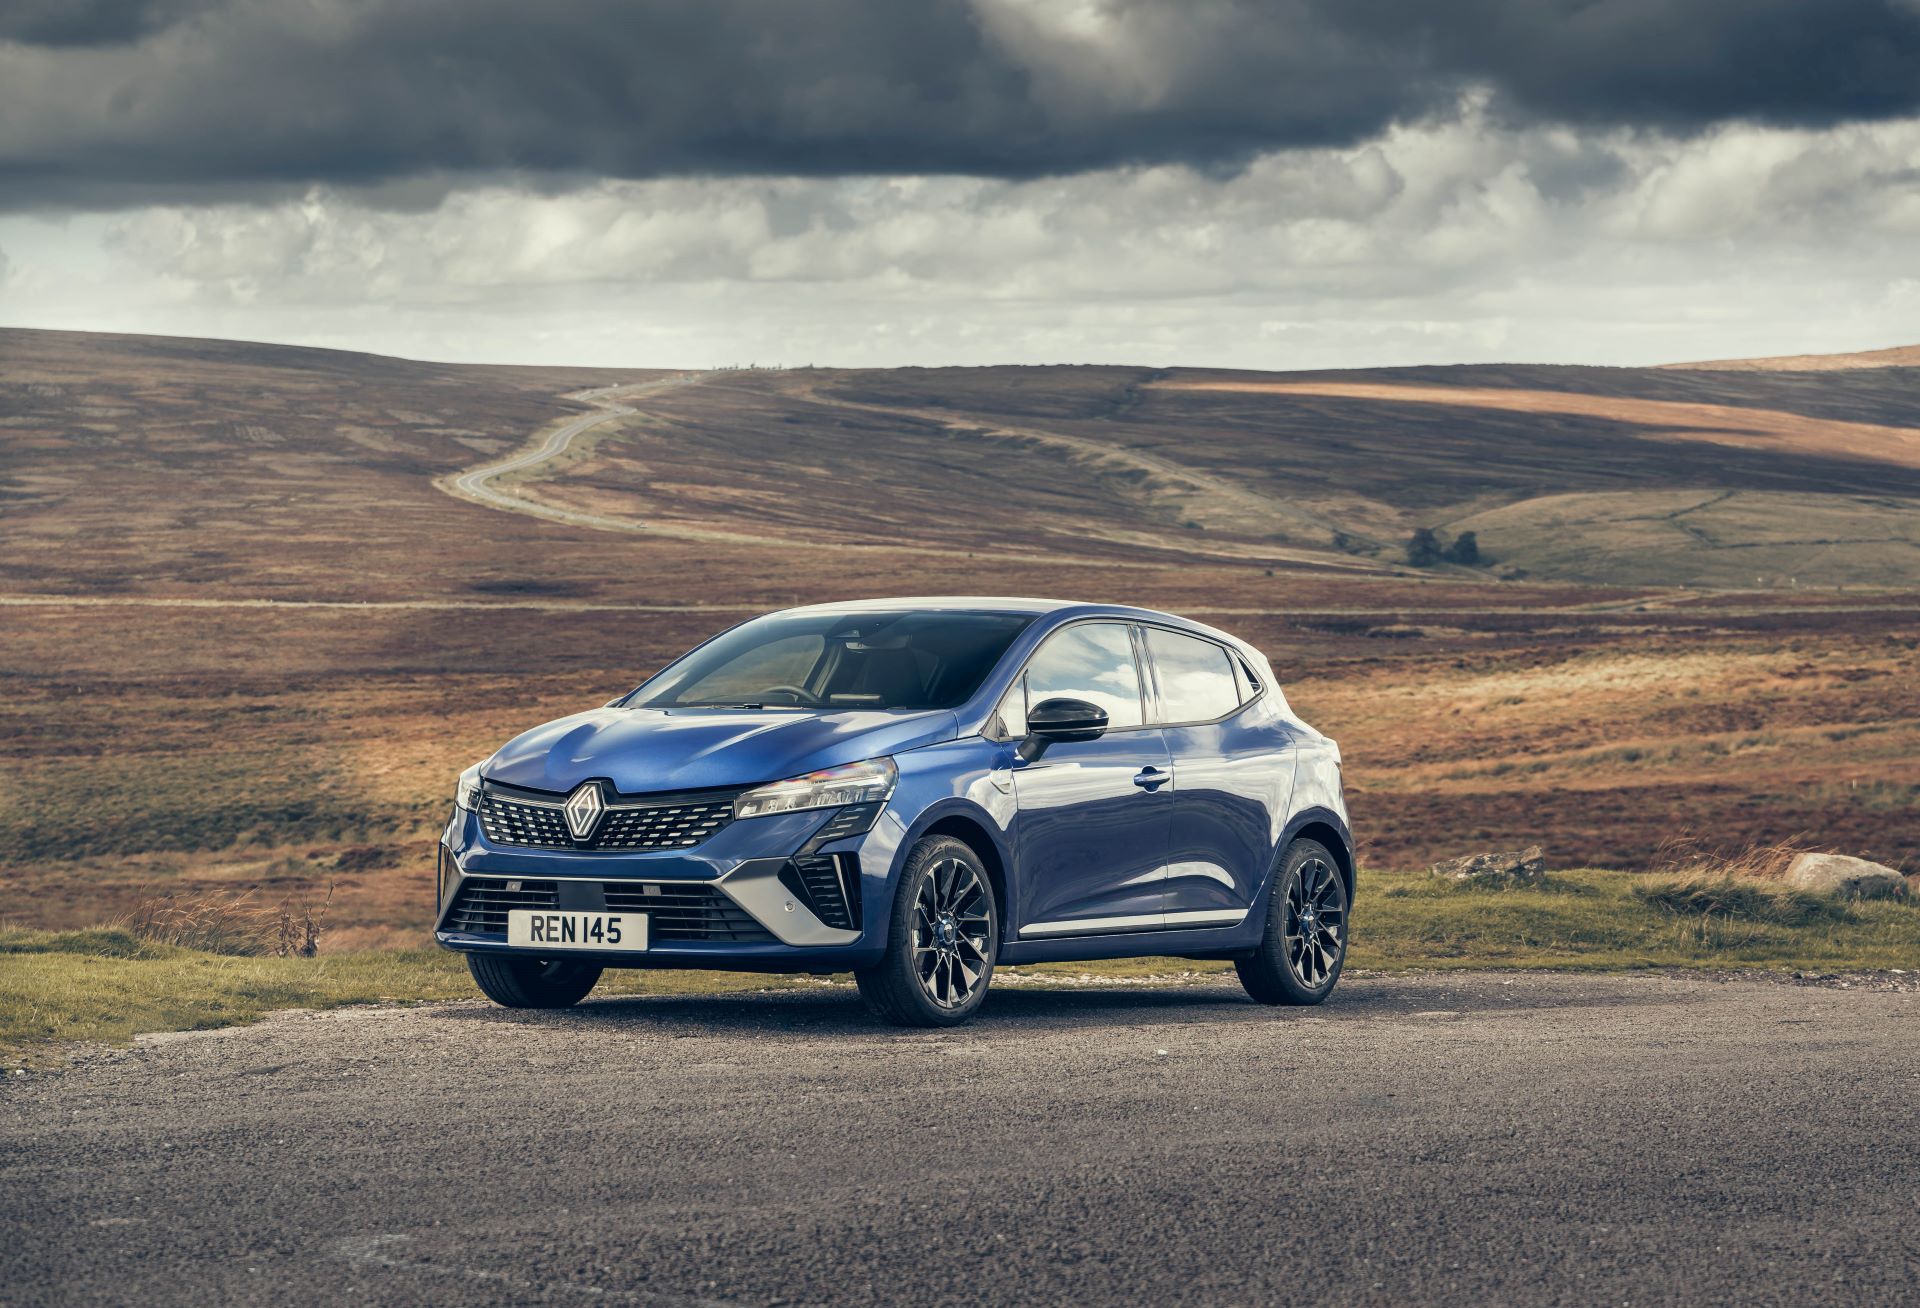 Renault customers motor ahead with an extra £500 deposit contribution on every new car during special Test Drive event